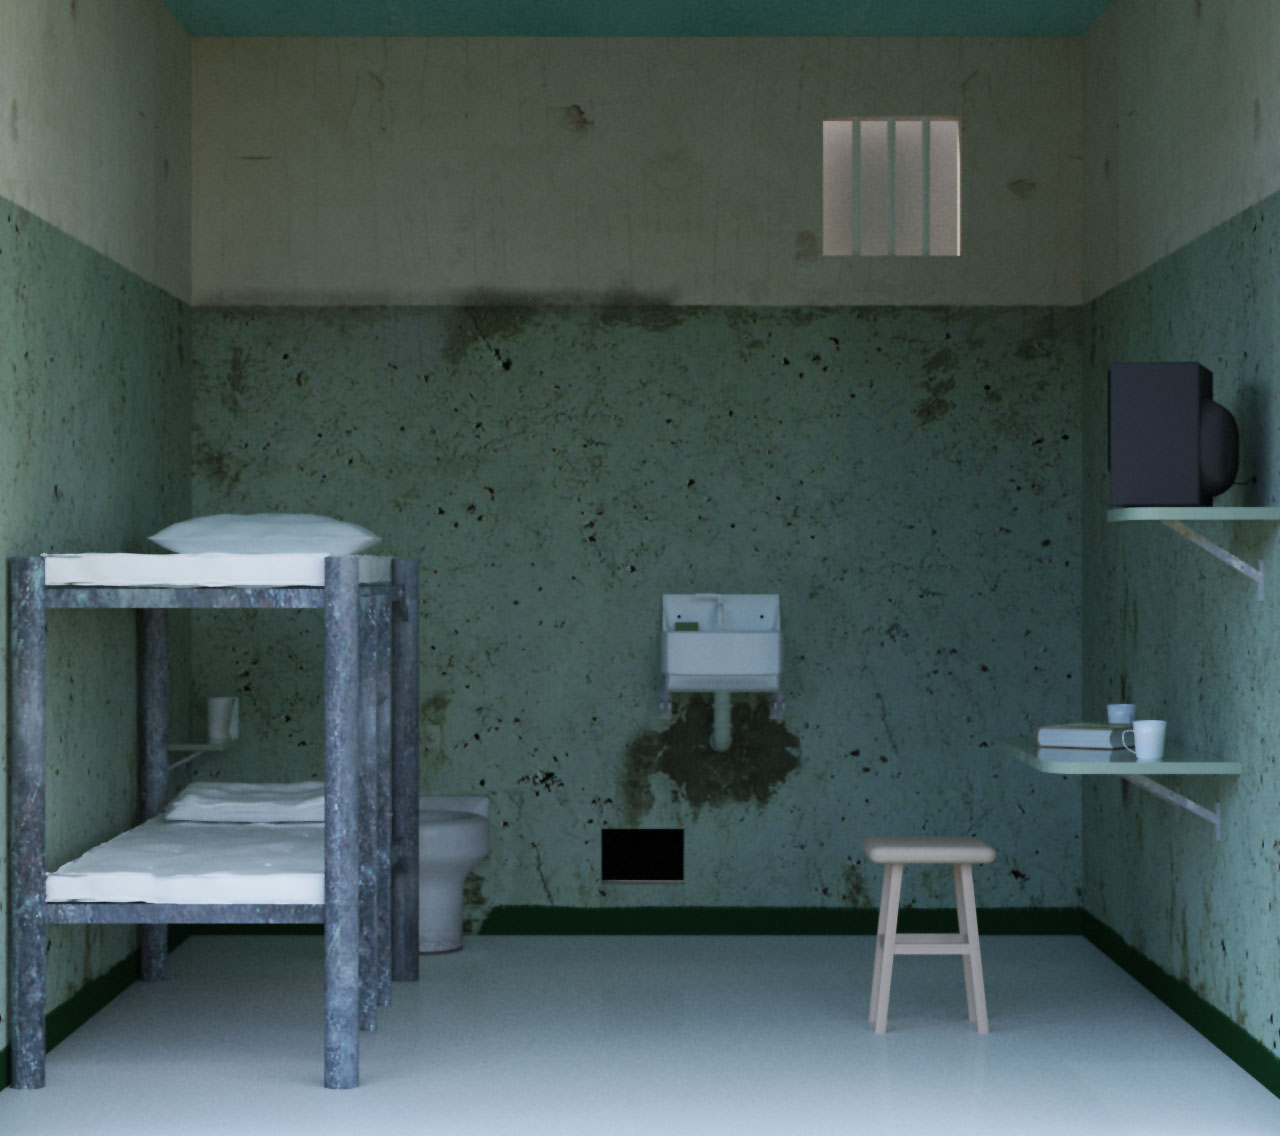 INT. JAIL CELL 1 – DAY